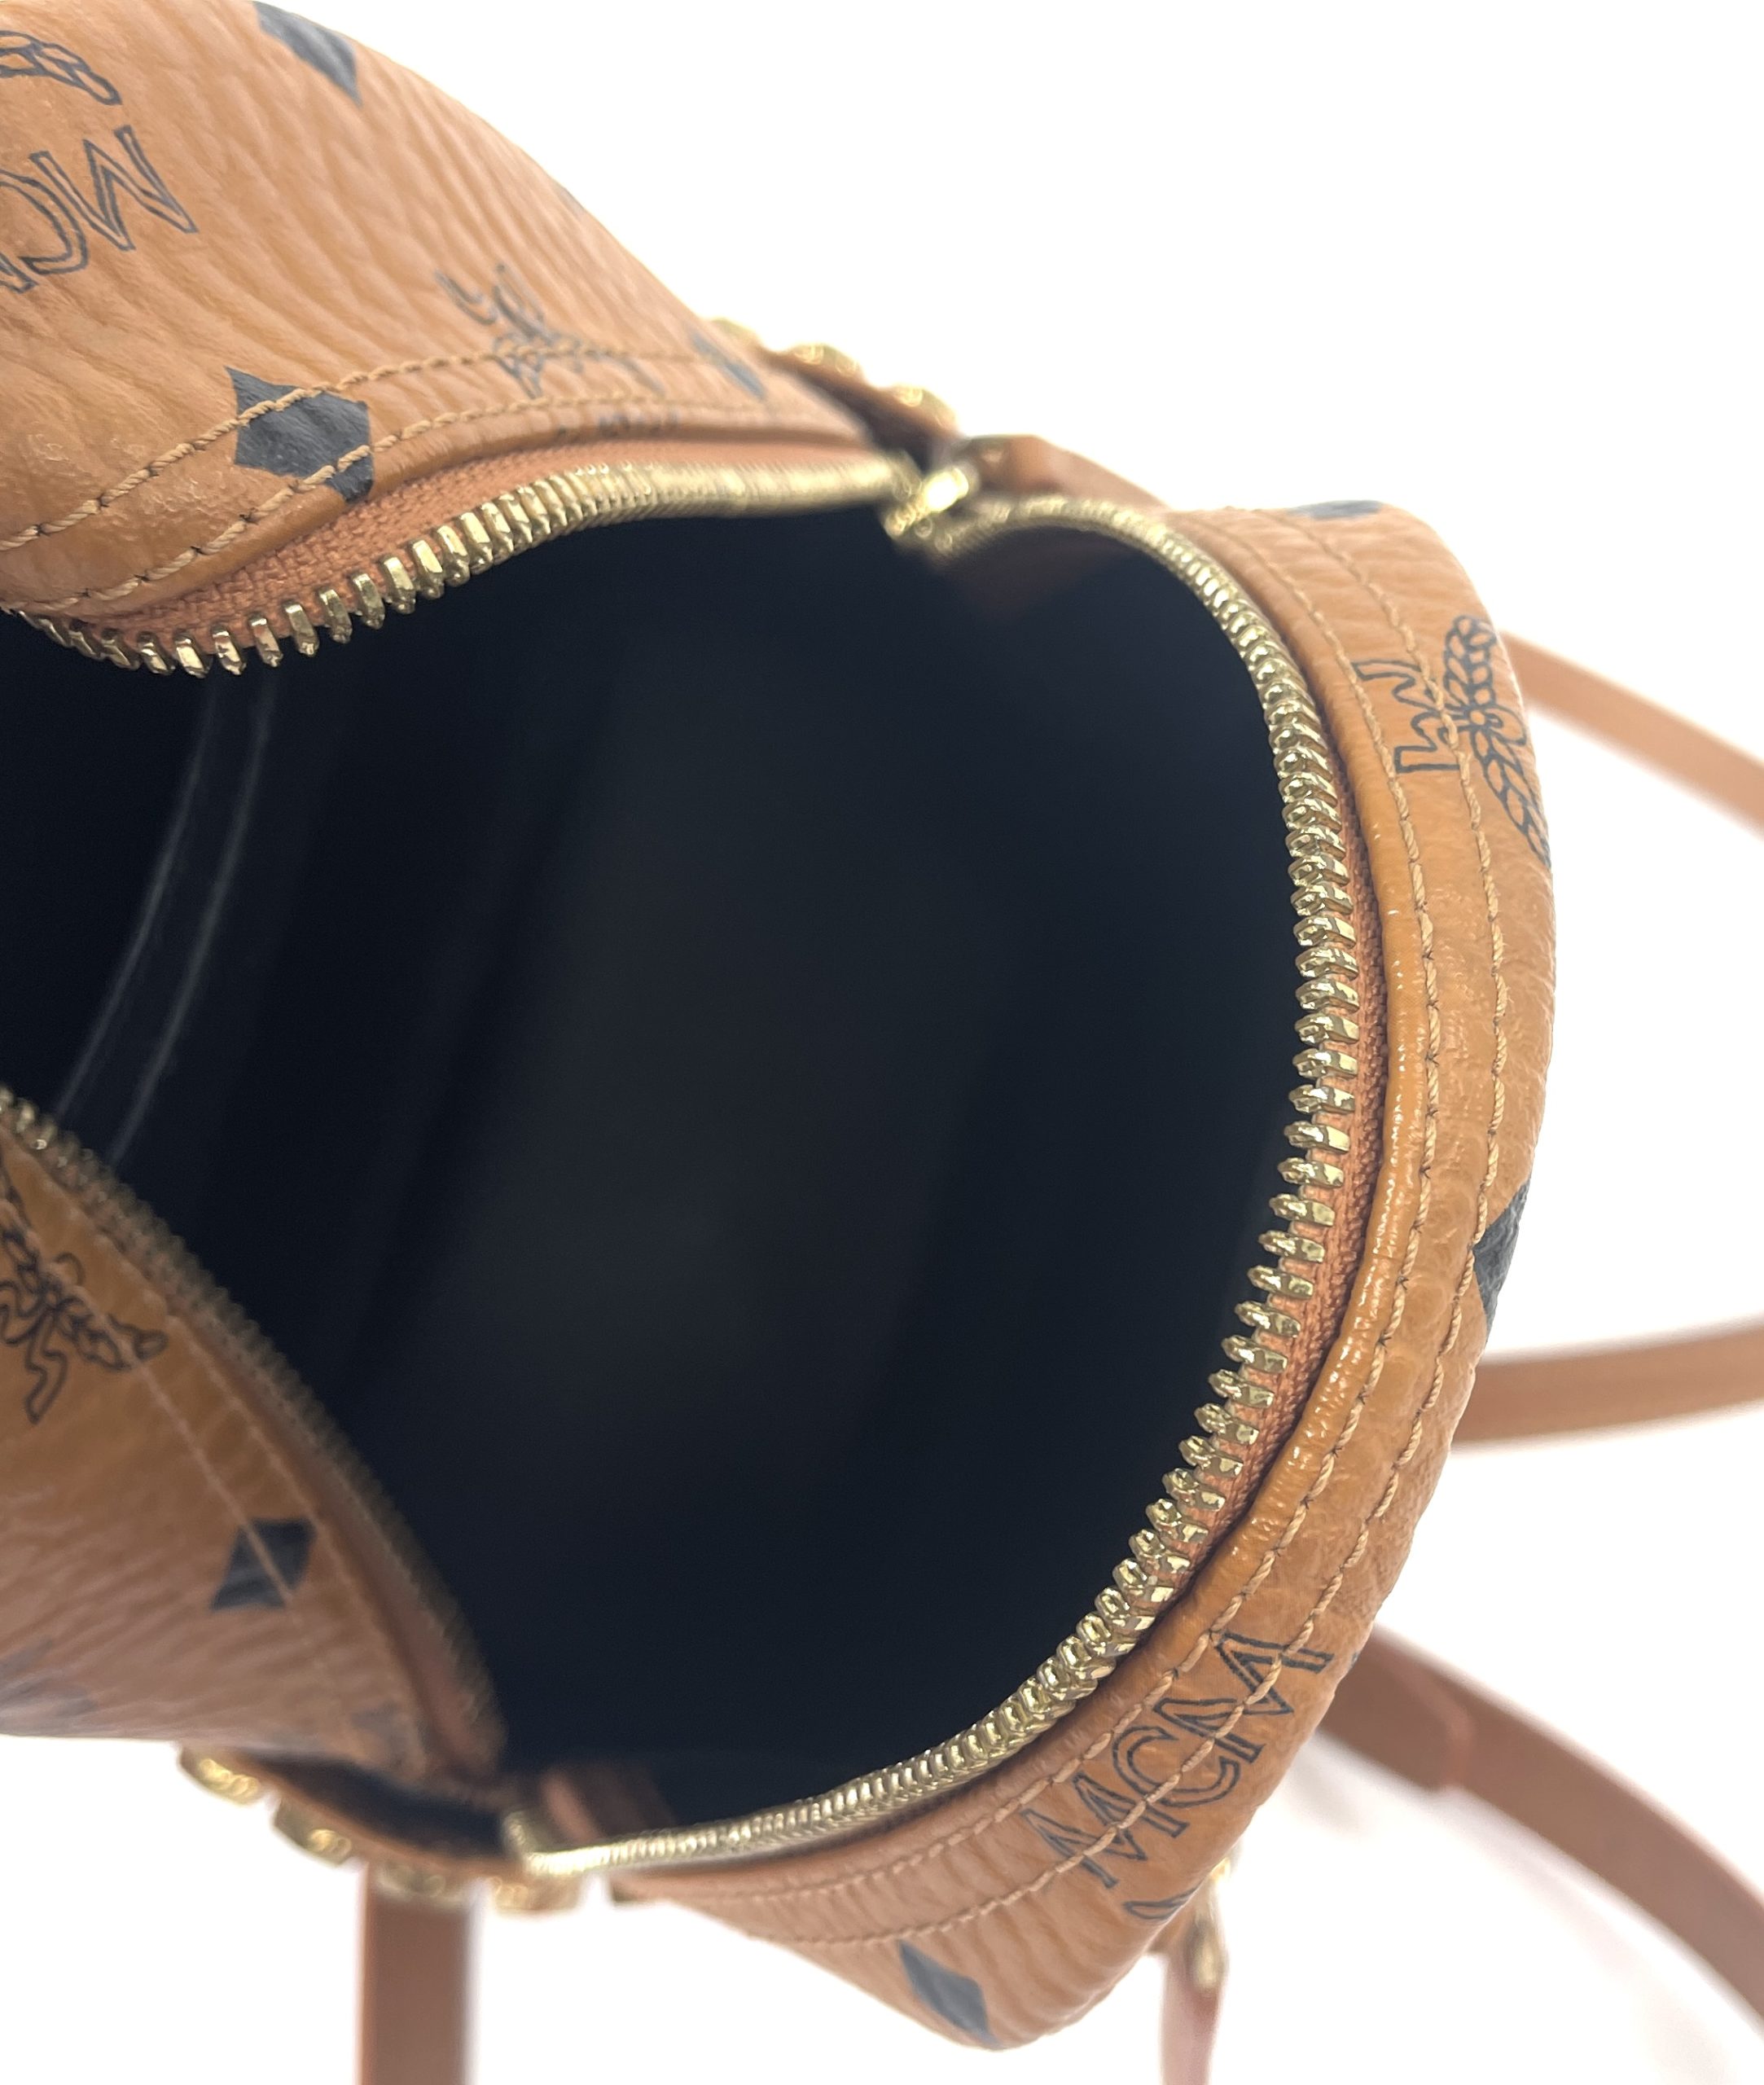 REVIEW: Louis Vuitton Palm Springs Backpack vs MCM Mini Stark Backpack 